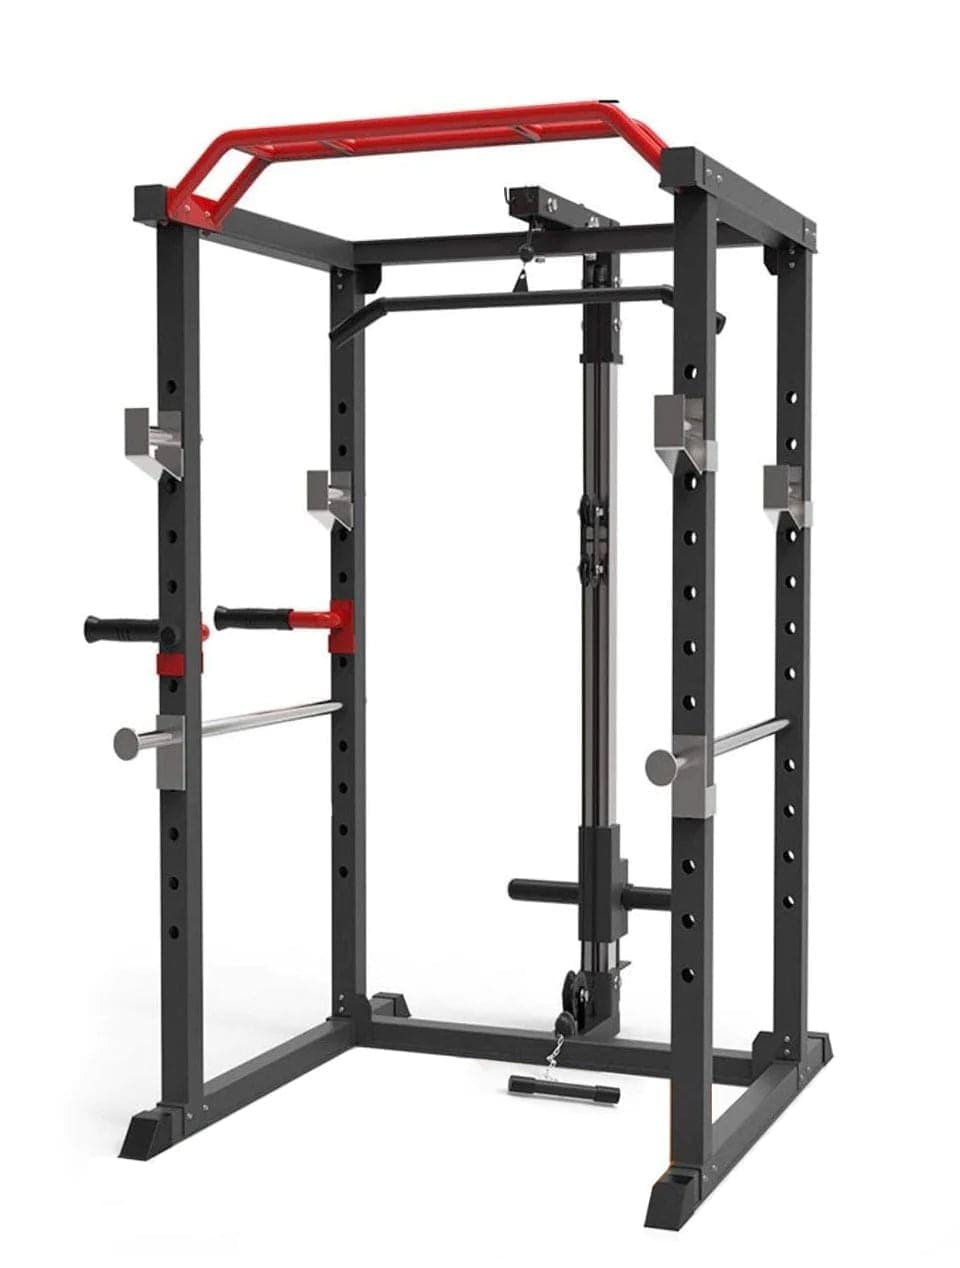 Combo Offer Power Cage Squat Rack J008 with Lat Attachement + 80 Kg Apus Bumper Plates Set + 16 MM Gym Flooring and Adjustable Bench A8007 - Athletix.ae